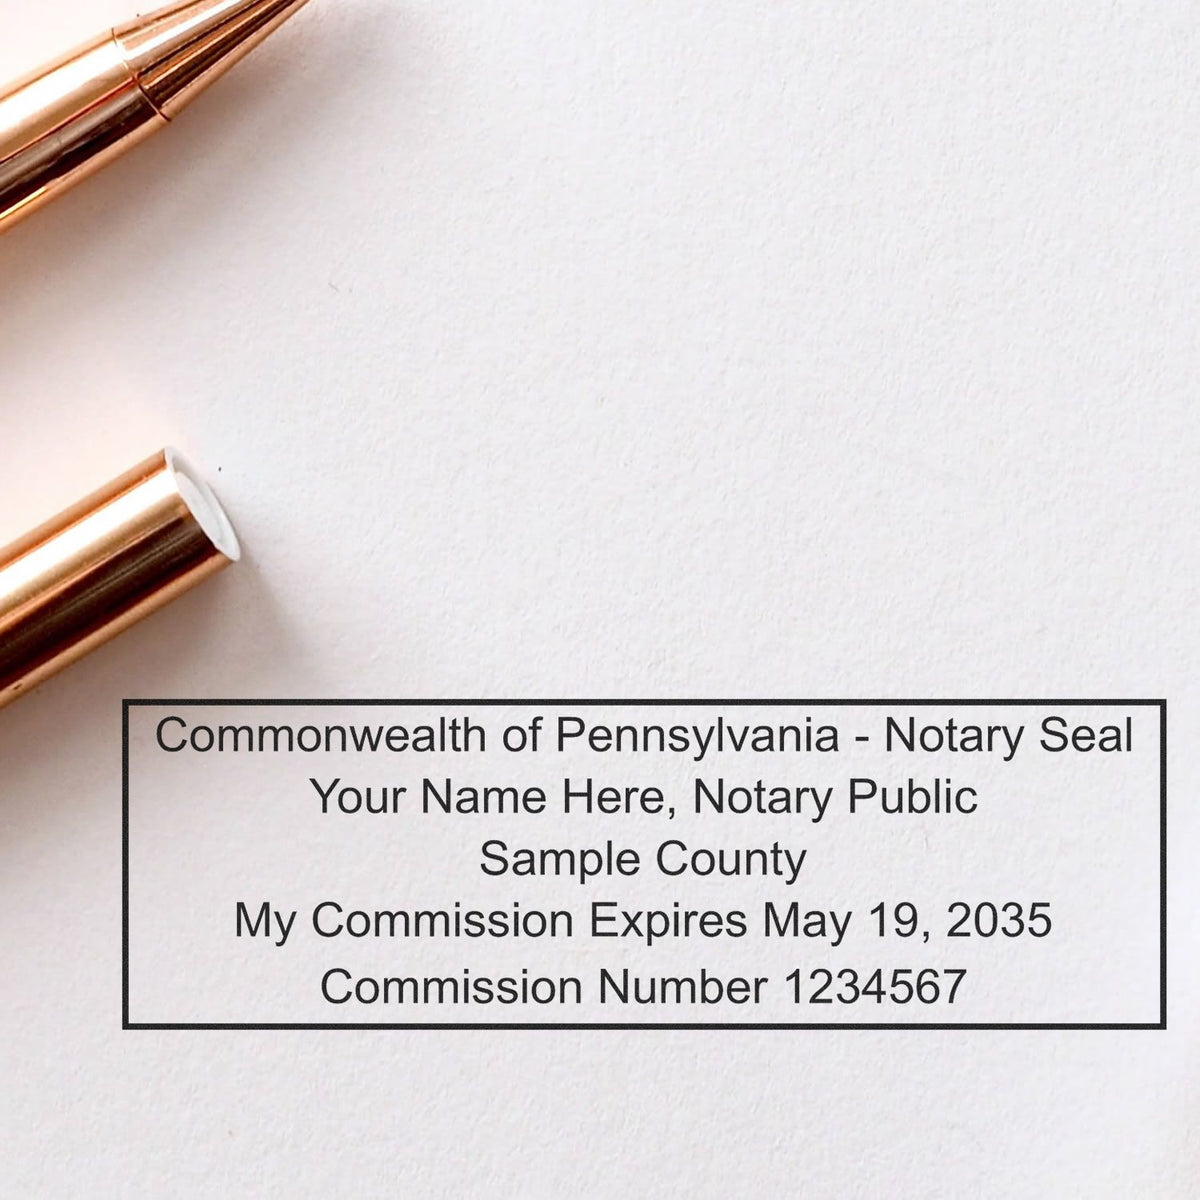 This paper is stamped with a sample imprint of the Super Slim Pennsylvania Notary Public Stamp, signifying its quality and reliability.